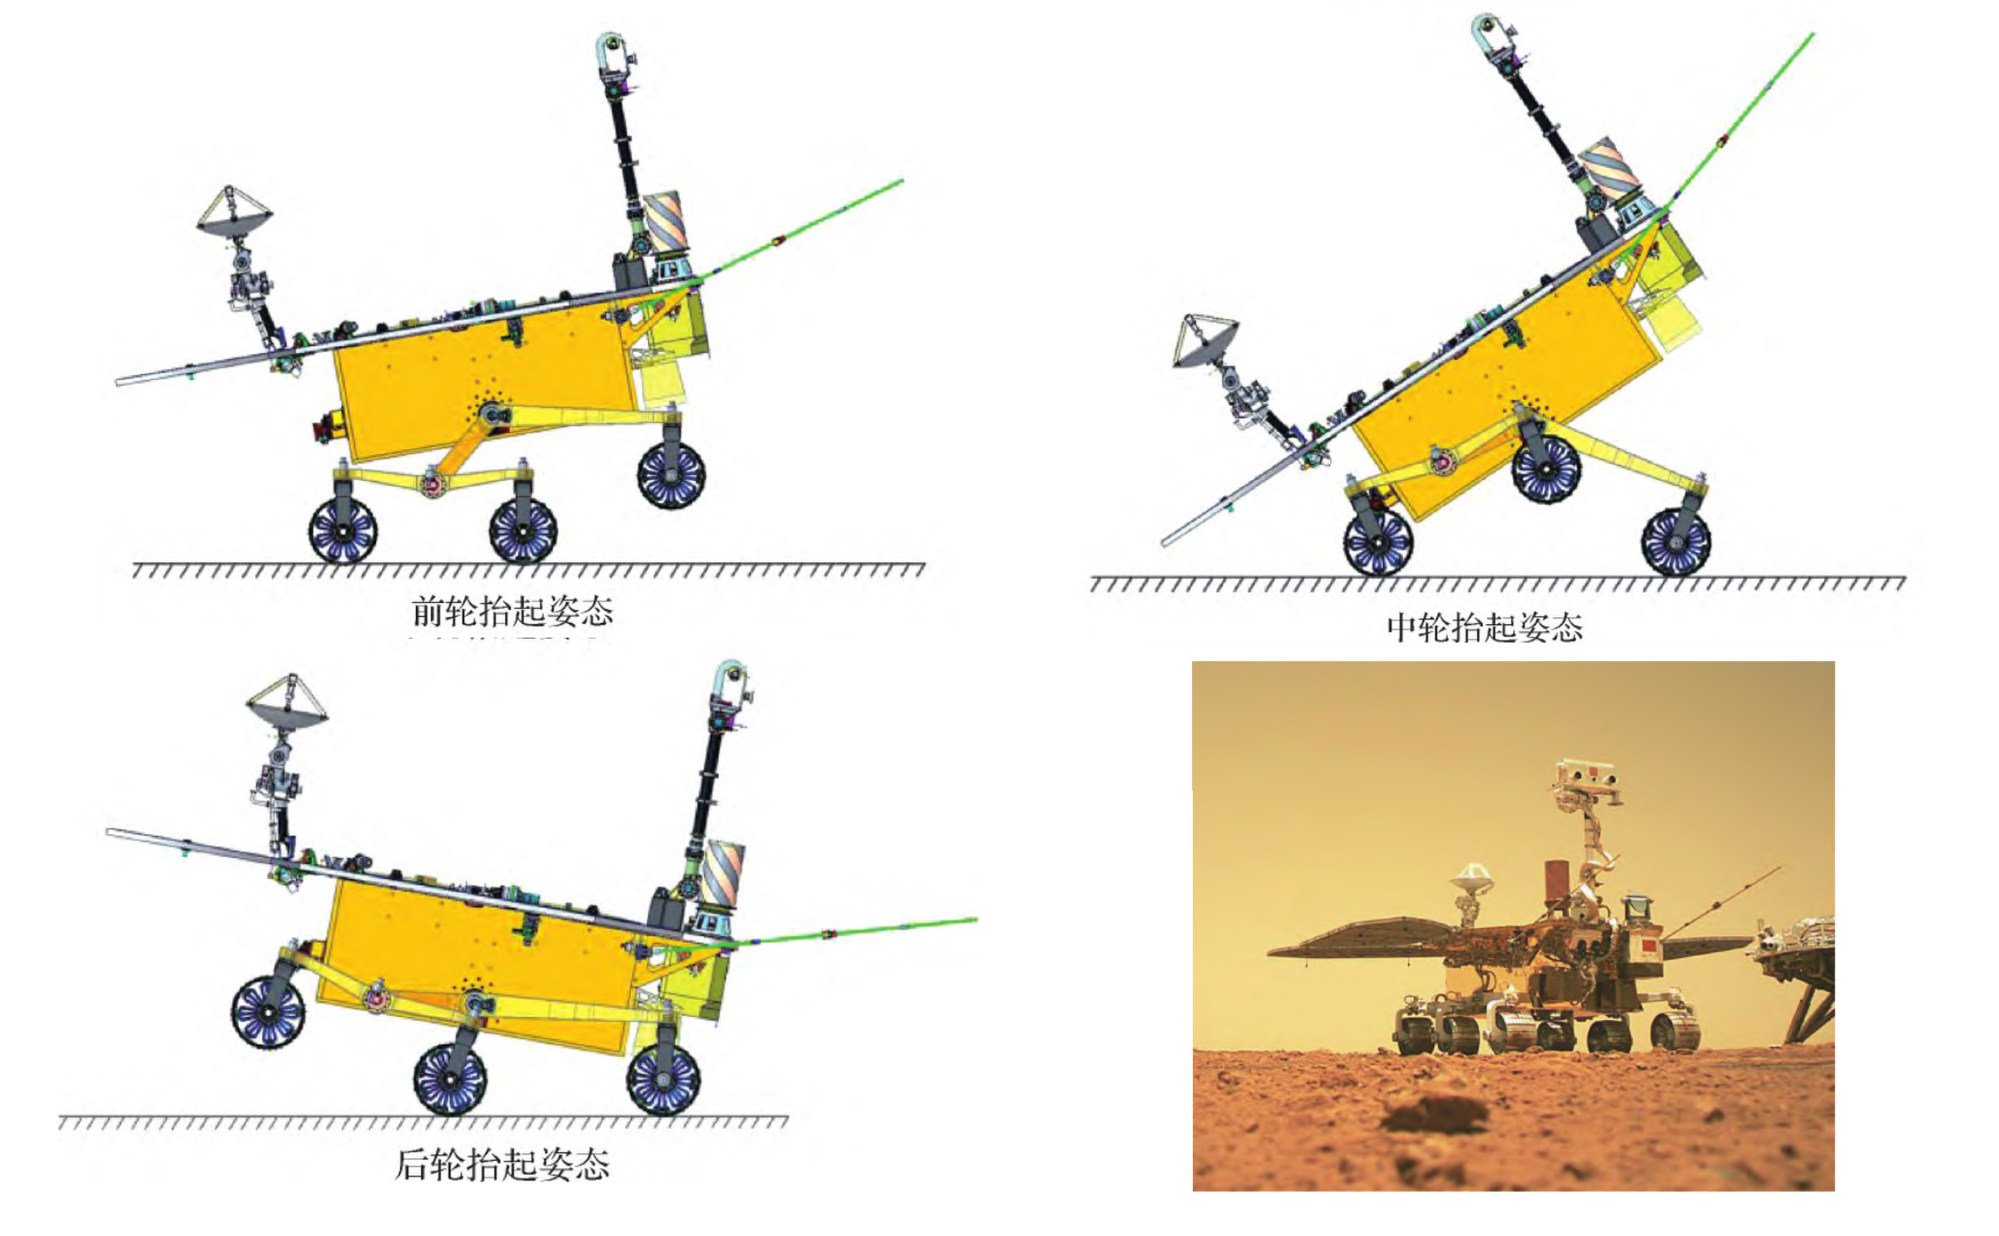 Zhu Rong’s inchworm-inspired suspension system allows it to move around the rough terrain of Mars without getting stuck in sand or rocks. Photo: Beijing Institute of Spacecraft System Engineering